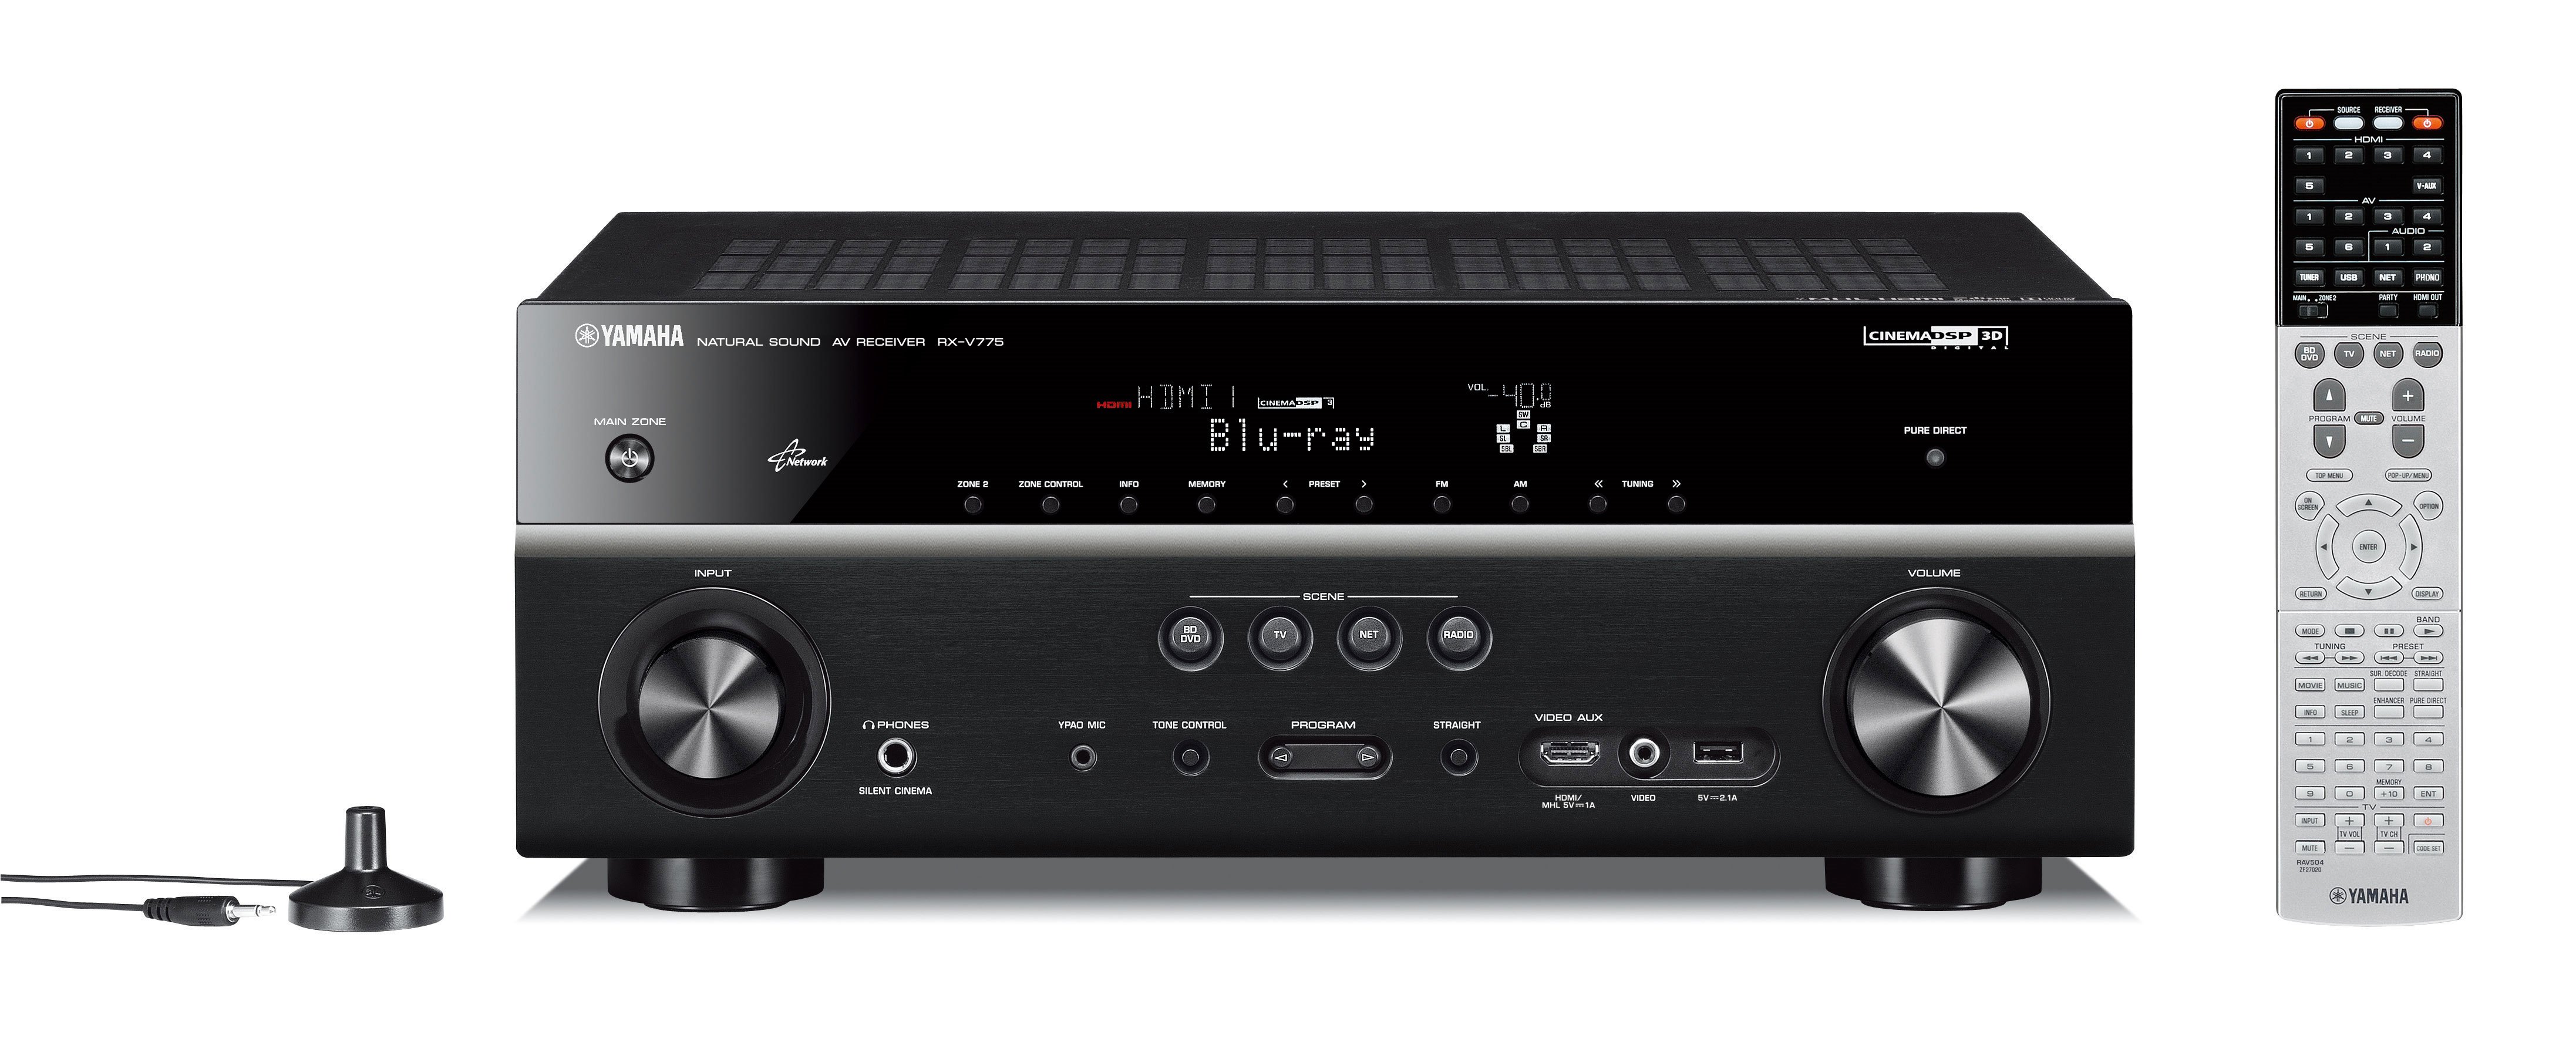 RX-V775 - Overview - AV Receivers - Audio & Visual - Products 